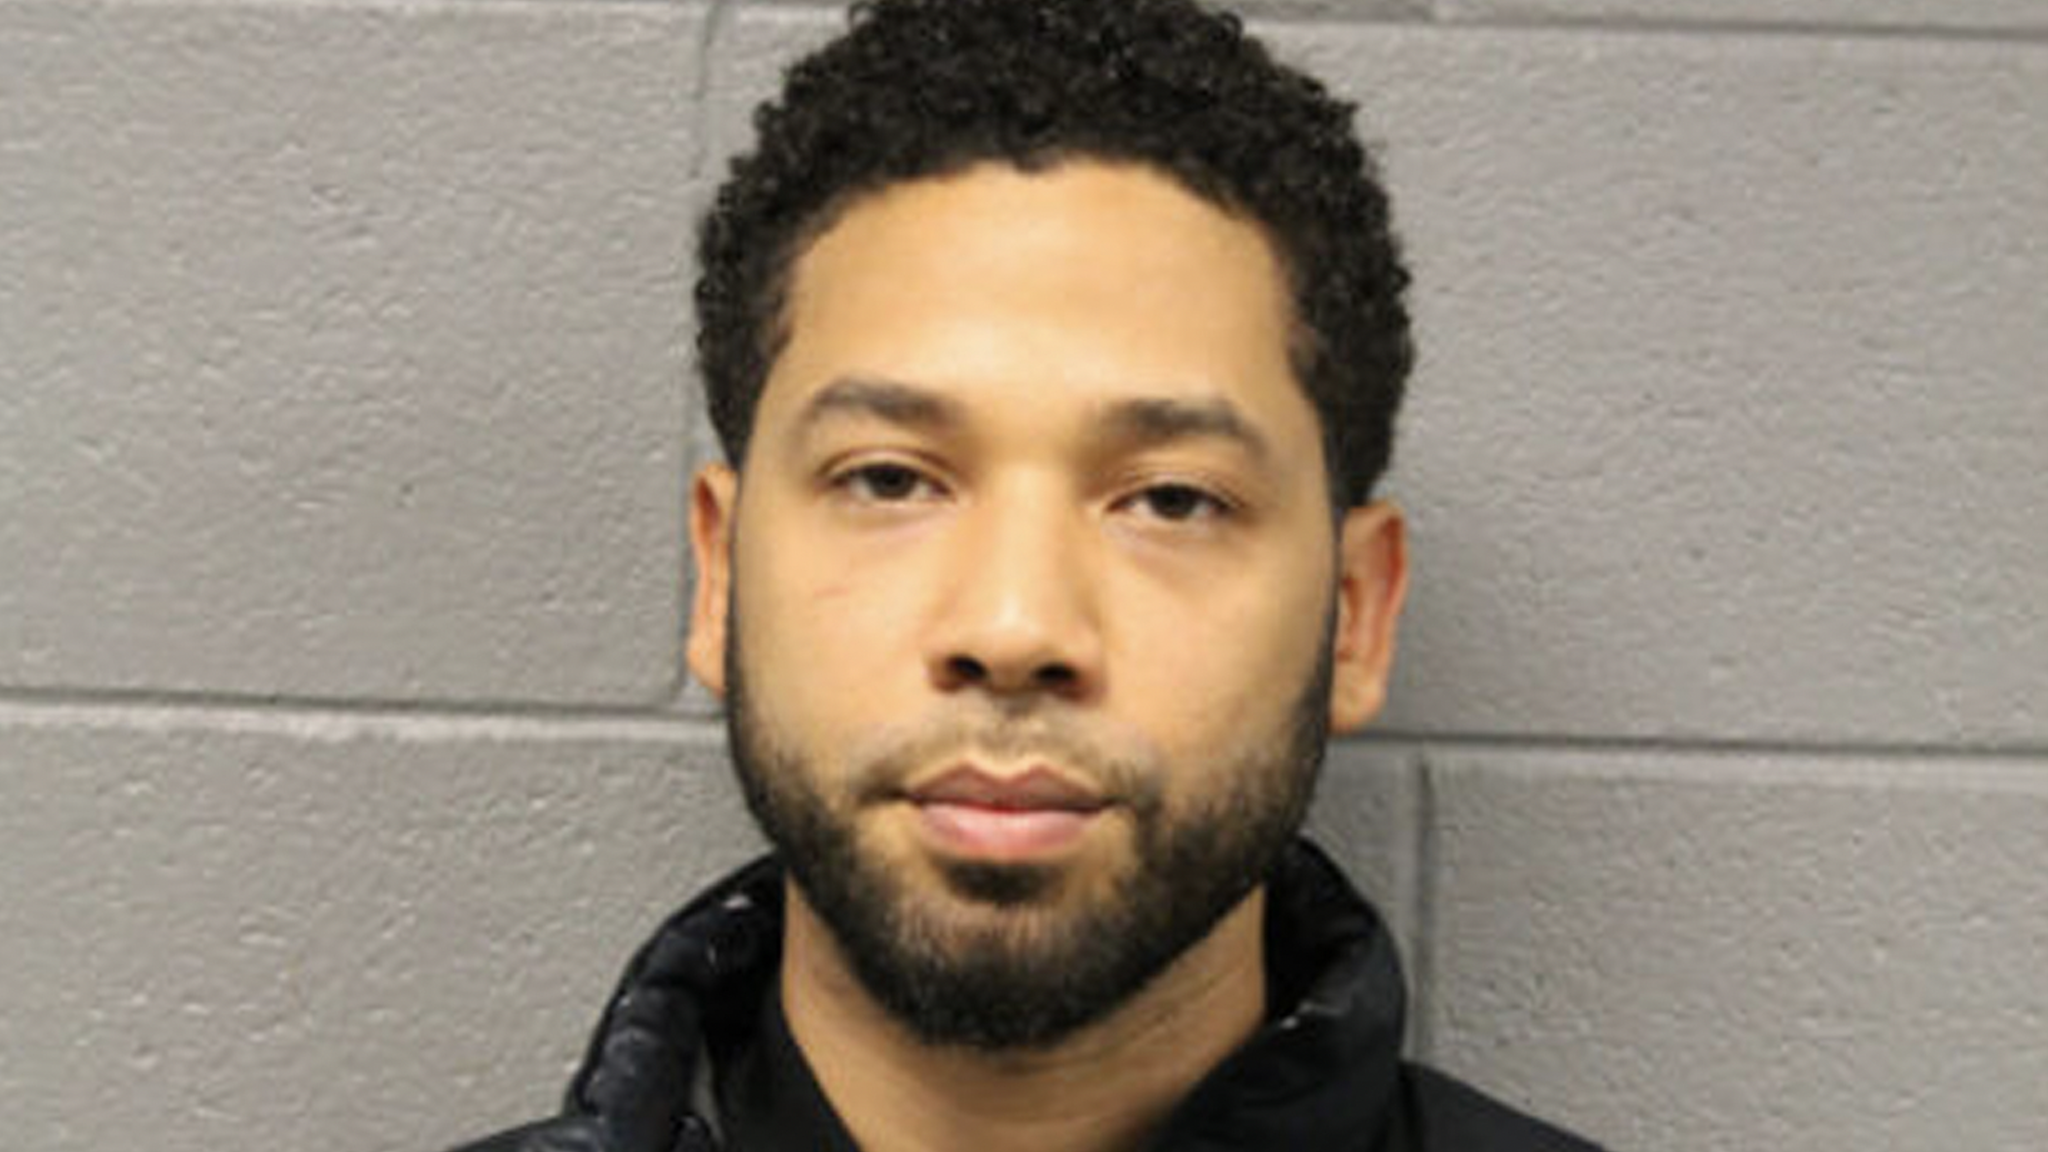 CHICAGO, IL - FEBRUARY 21: In this handout provided by the Chicago Police Department, Jussie Smollett poses for a booking photo after turning himself into the Chicago Police Department on February 21, 2019 in Chicago, Illinois. The 36-year-old "Empire" star is facing a class four felony charge for filing a false police report after claiming he was the victim of an assault on January 29th.